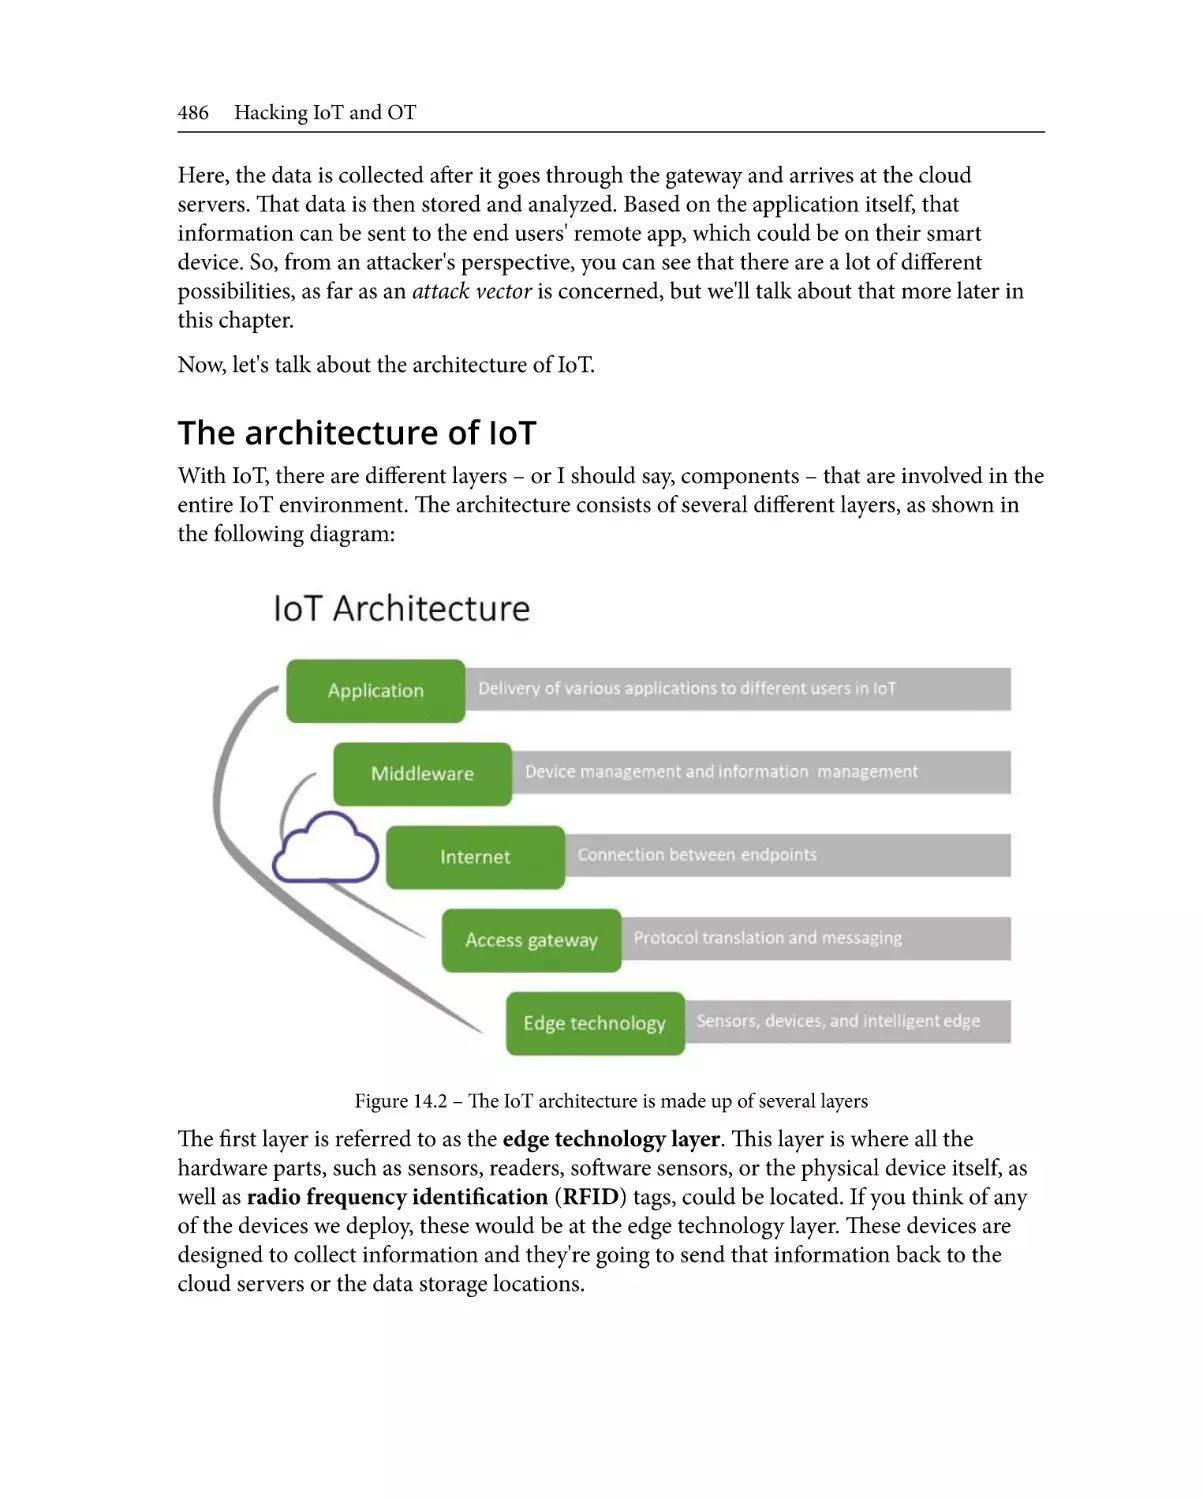 The architecture of IoT